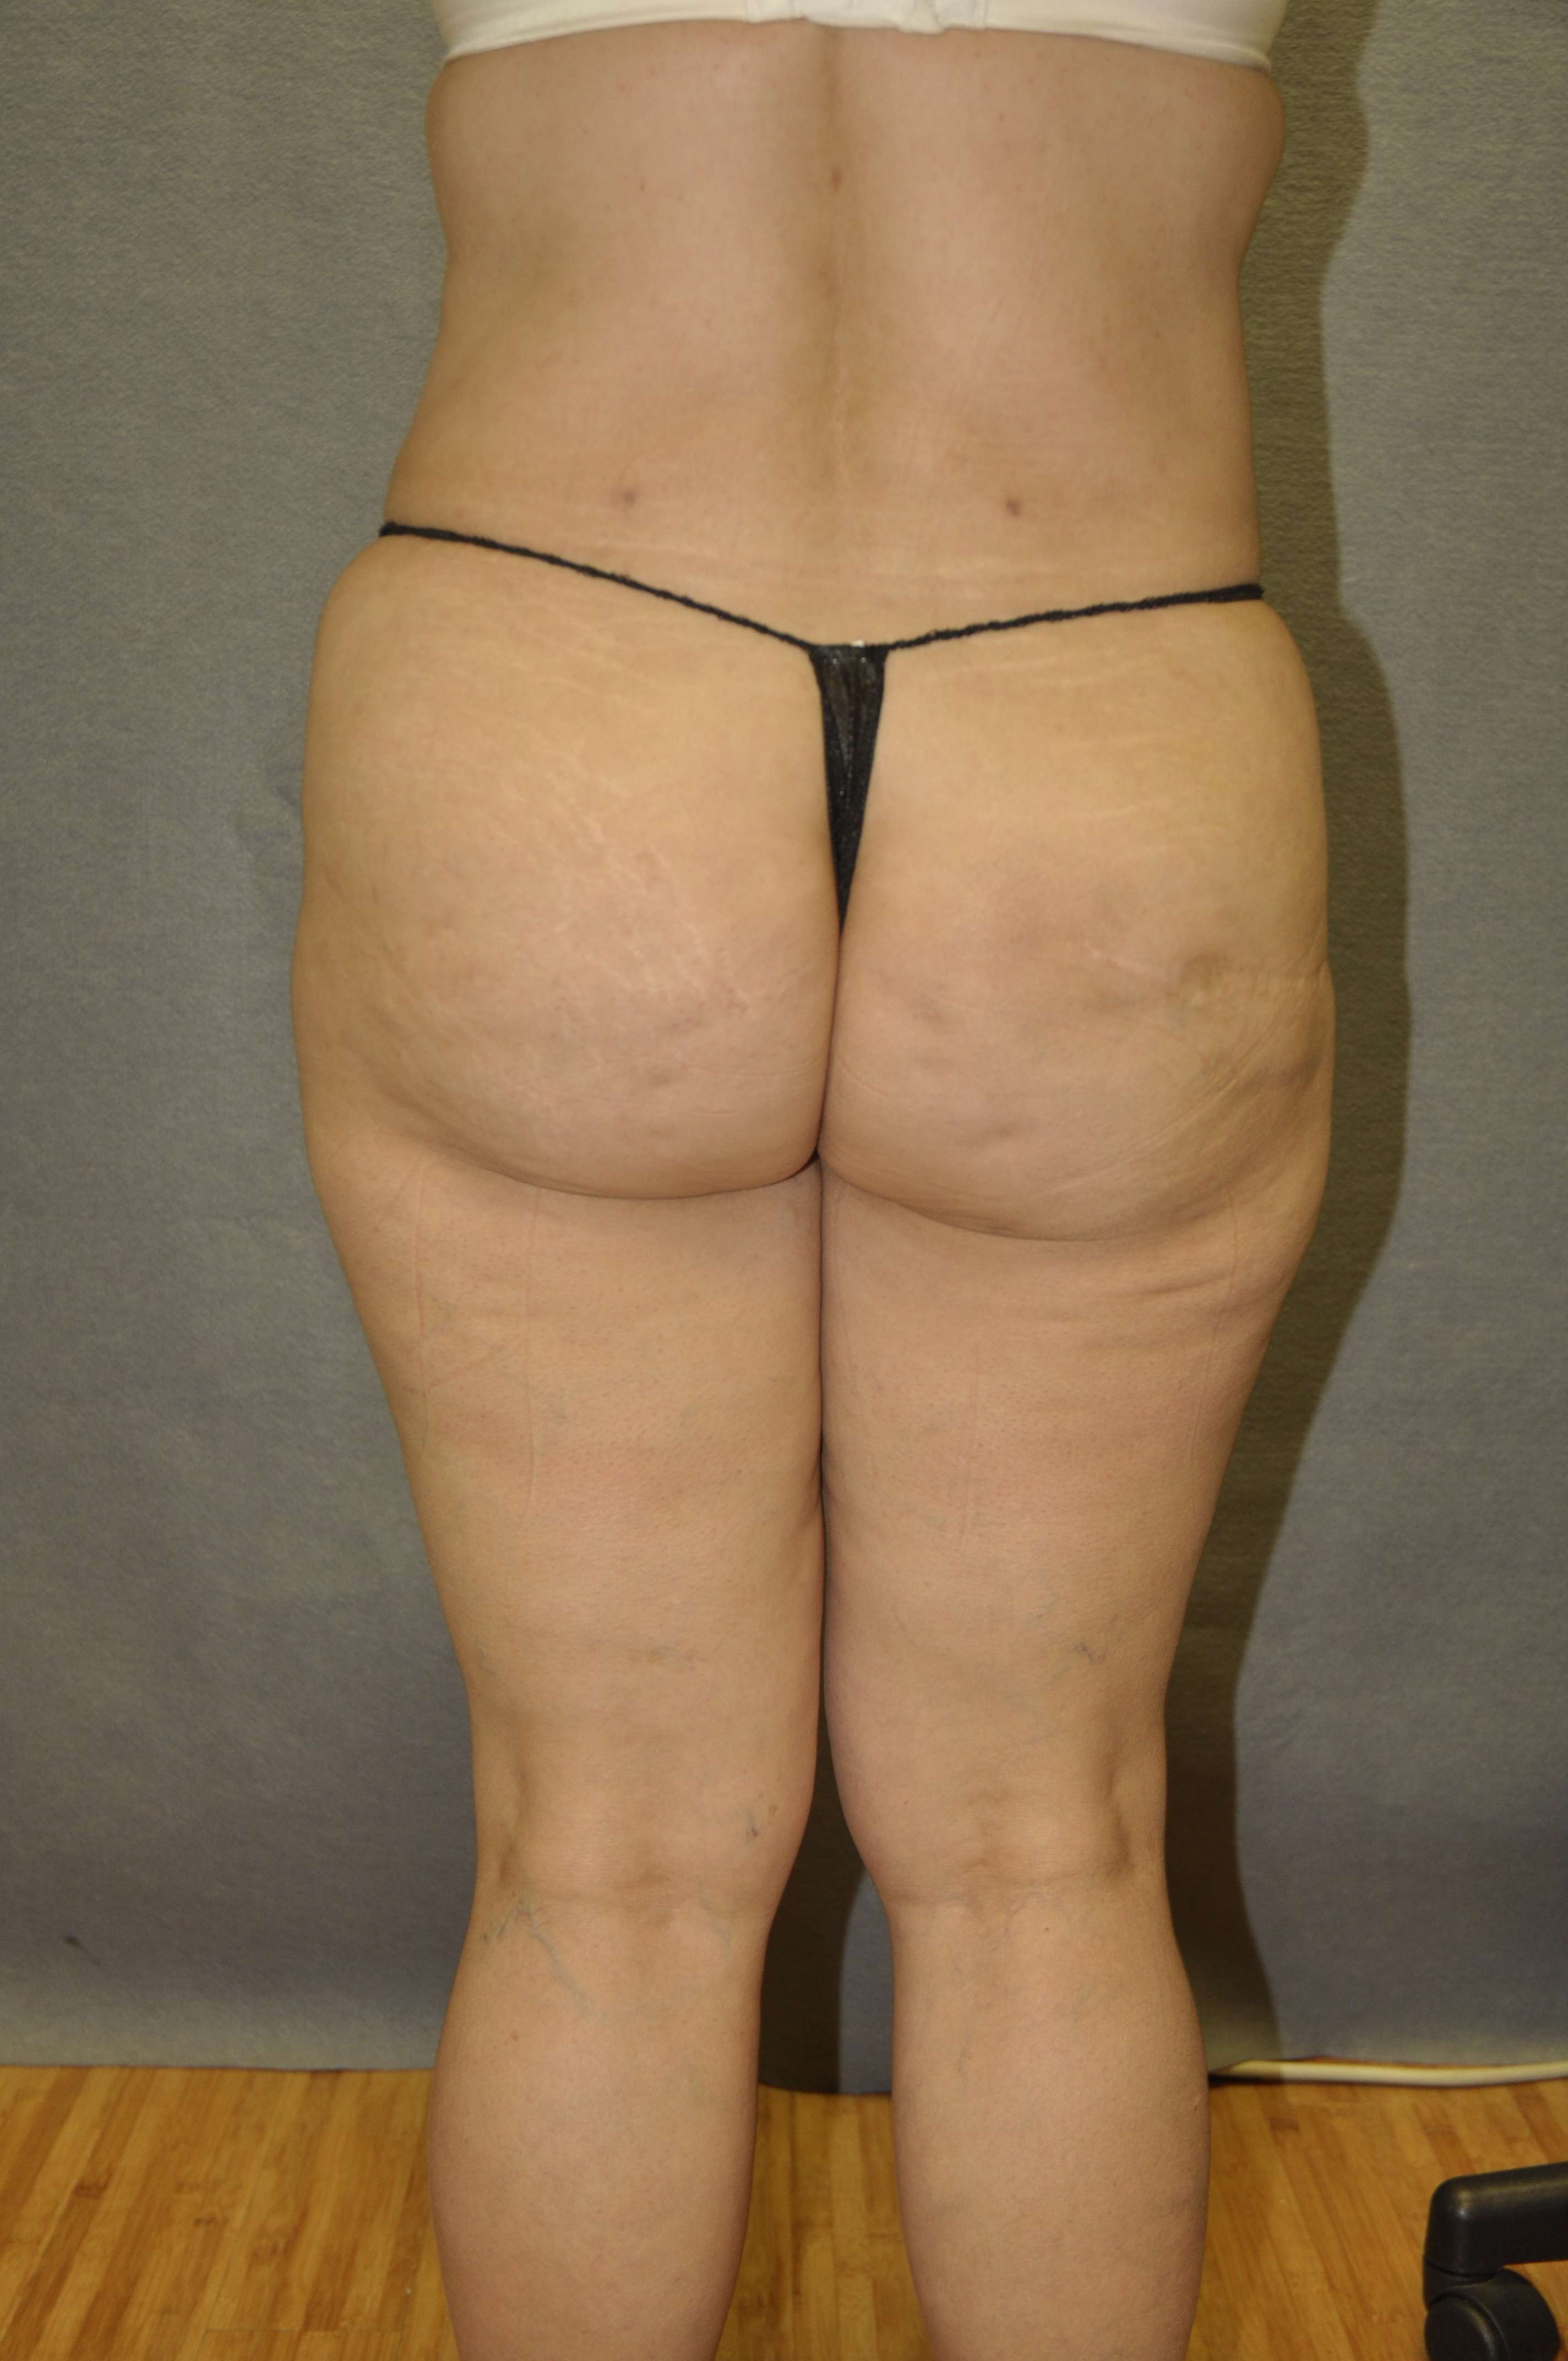 BRAZILIAN BUTT LIFT Before and After Results